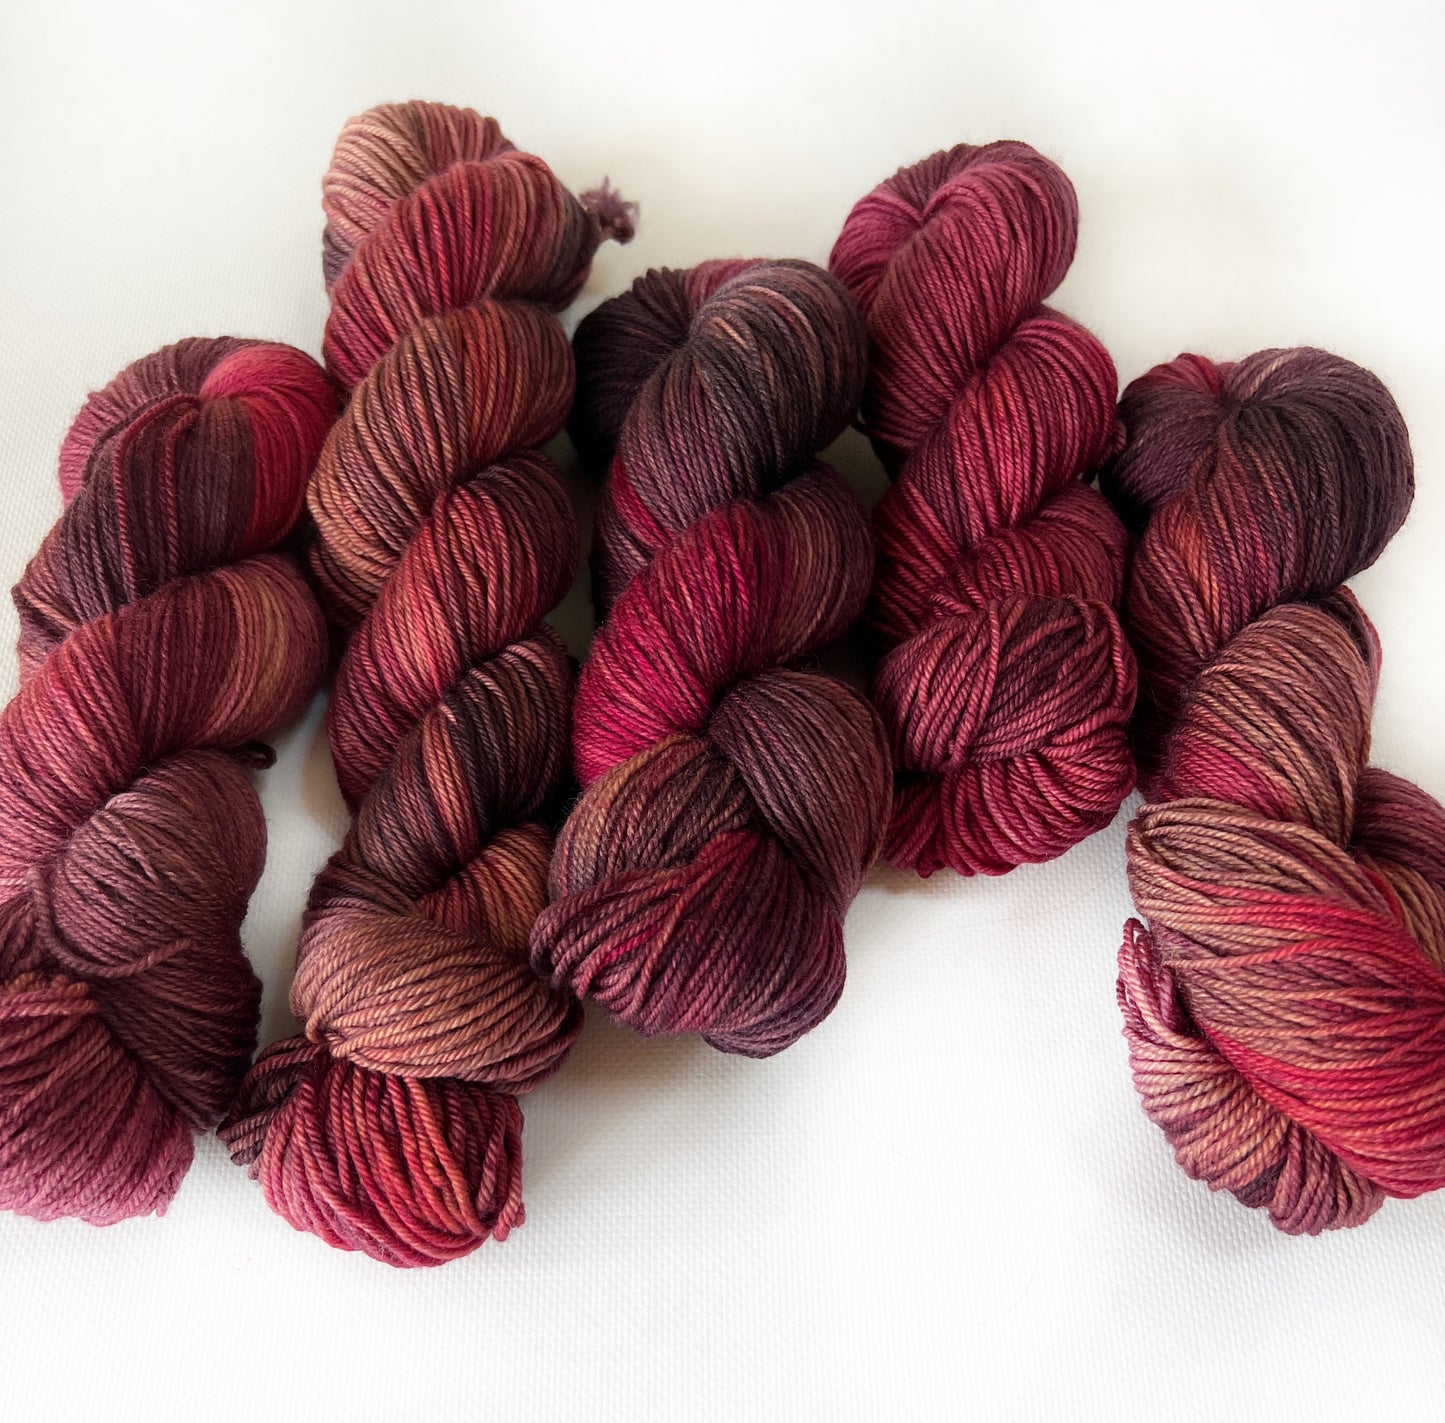 Crying over spilled Cabernet - Worsted 3 Ply - Okanagan Dye Works